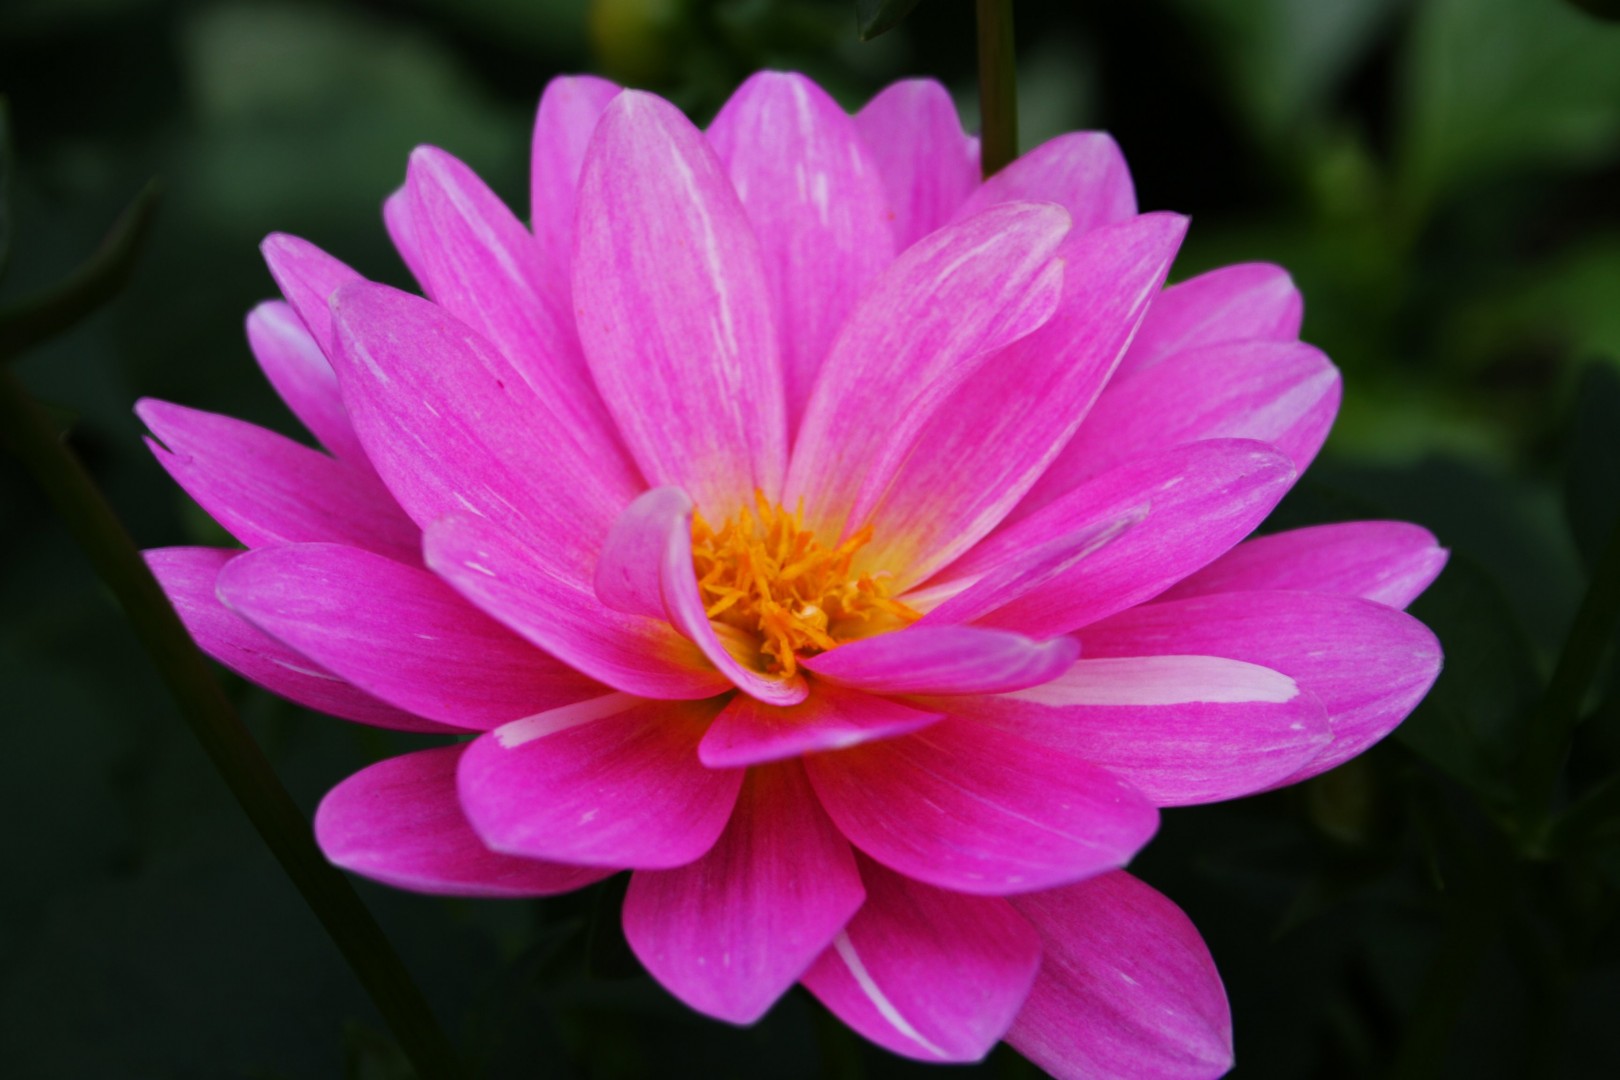 Nice Pink Flower Image, Nature Photography, #3040